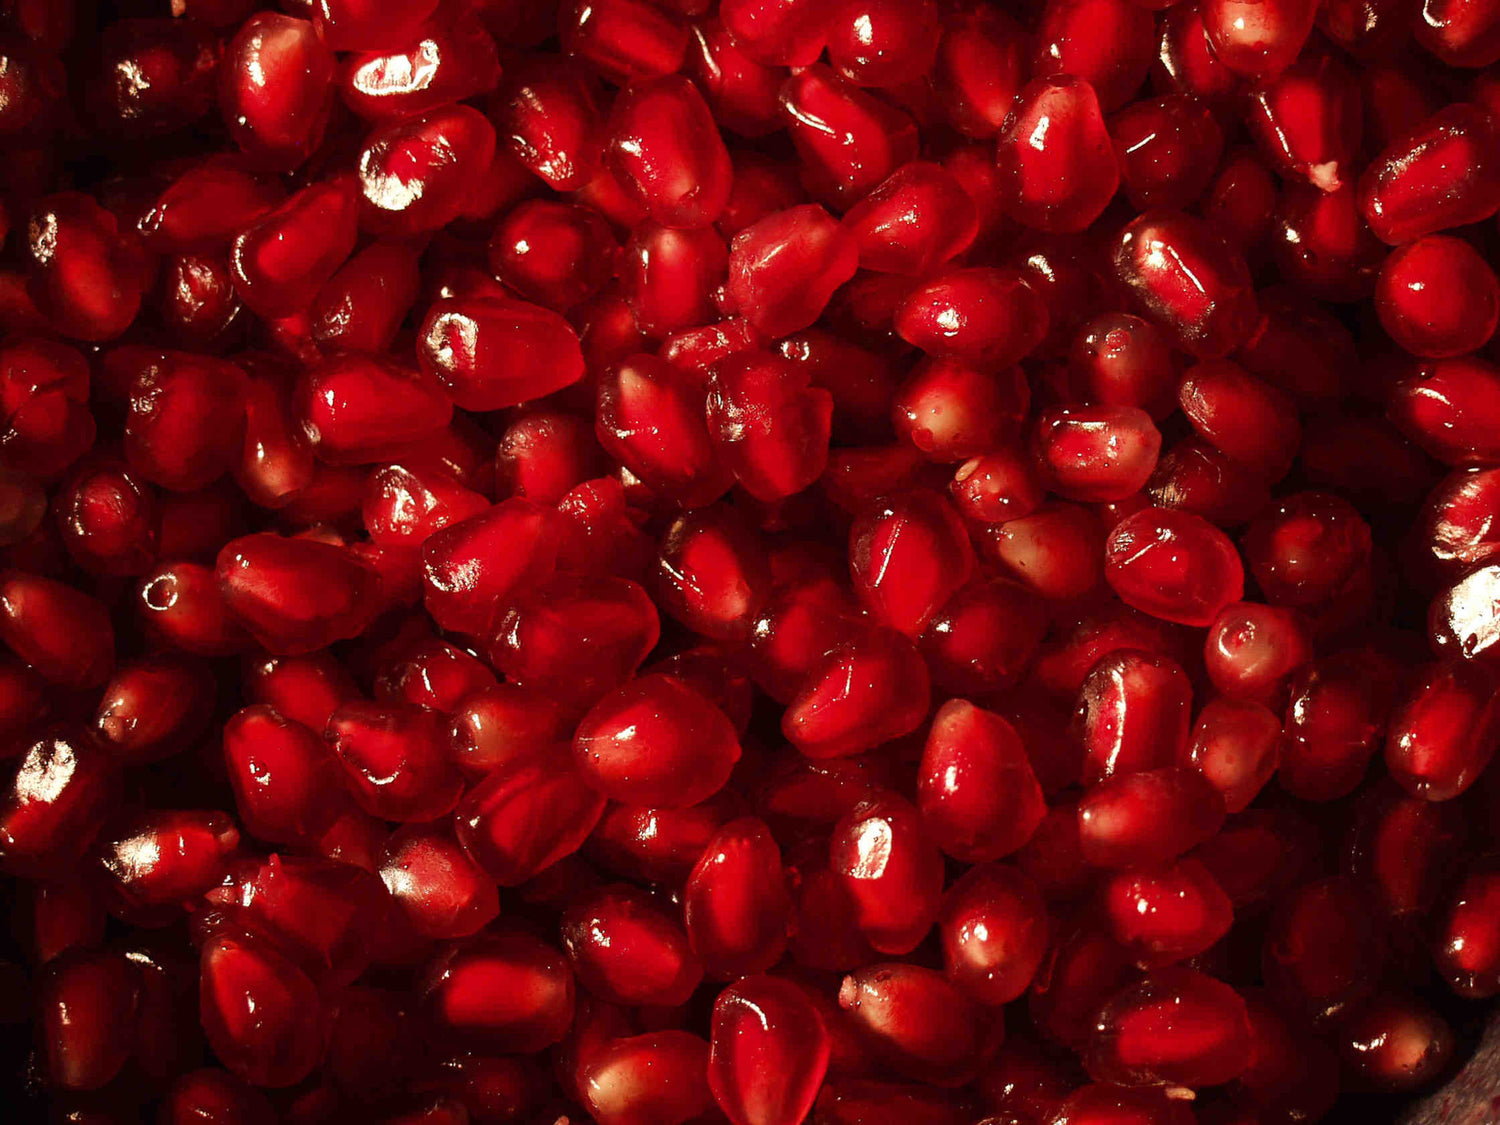 A BRIEF INTRODUCTION OF POMEGRANATE